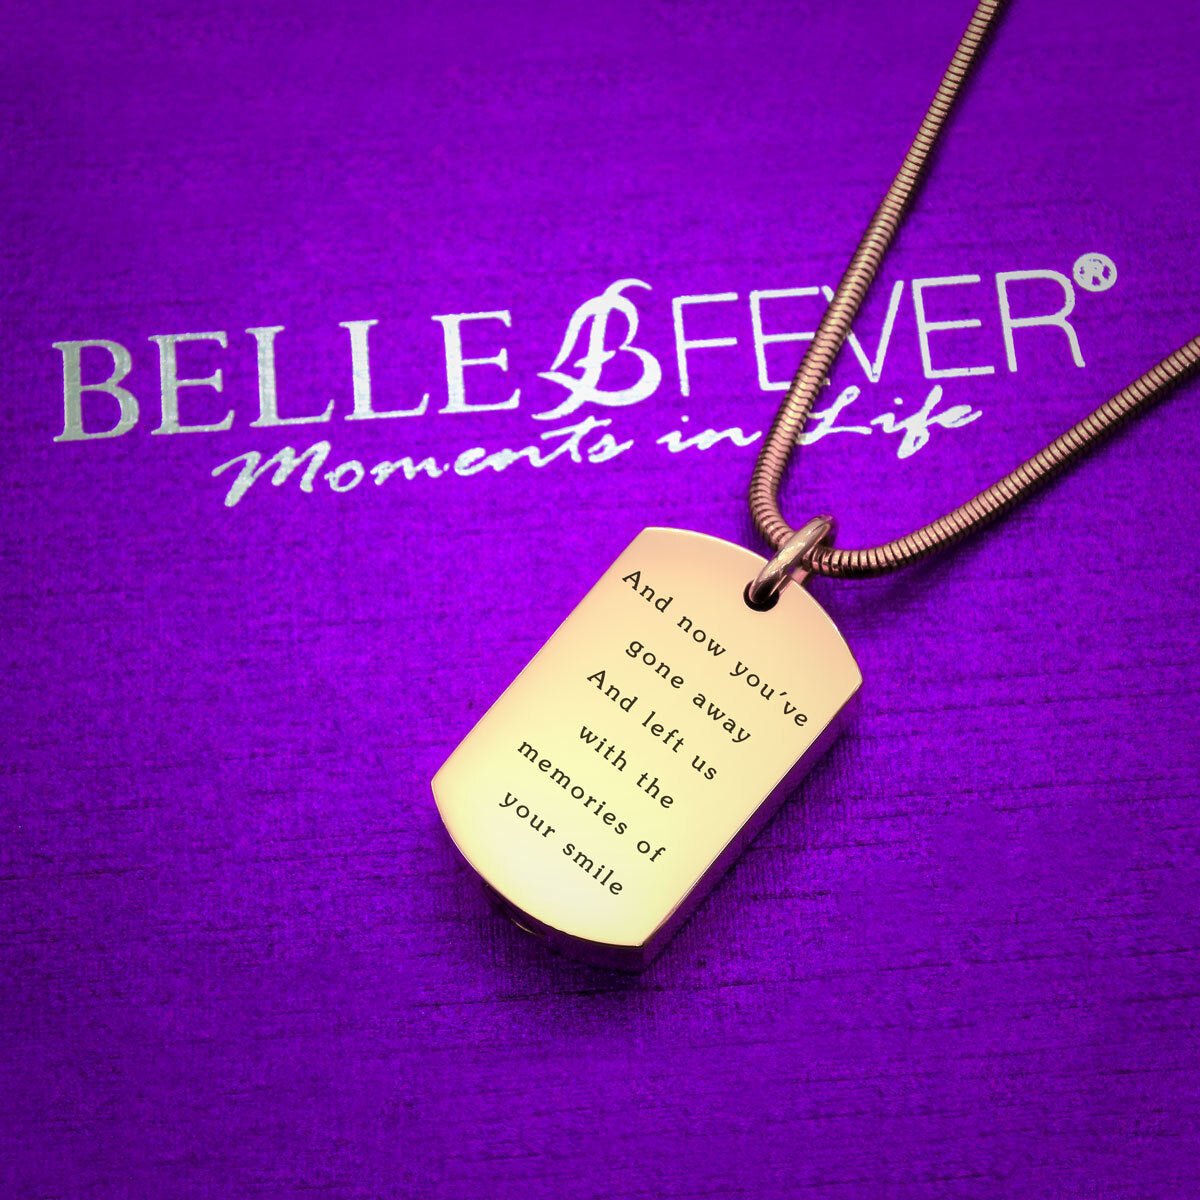 More than just Jewellery - BELLE FEVER